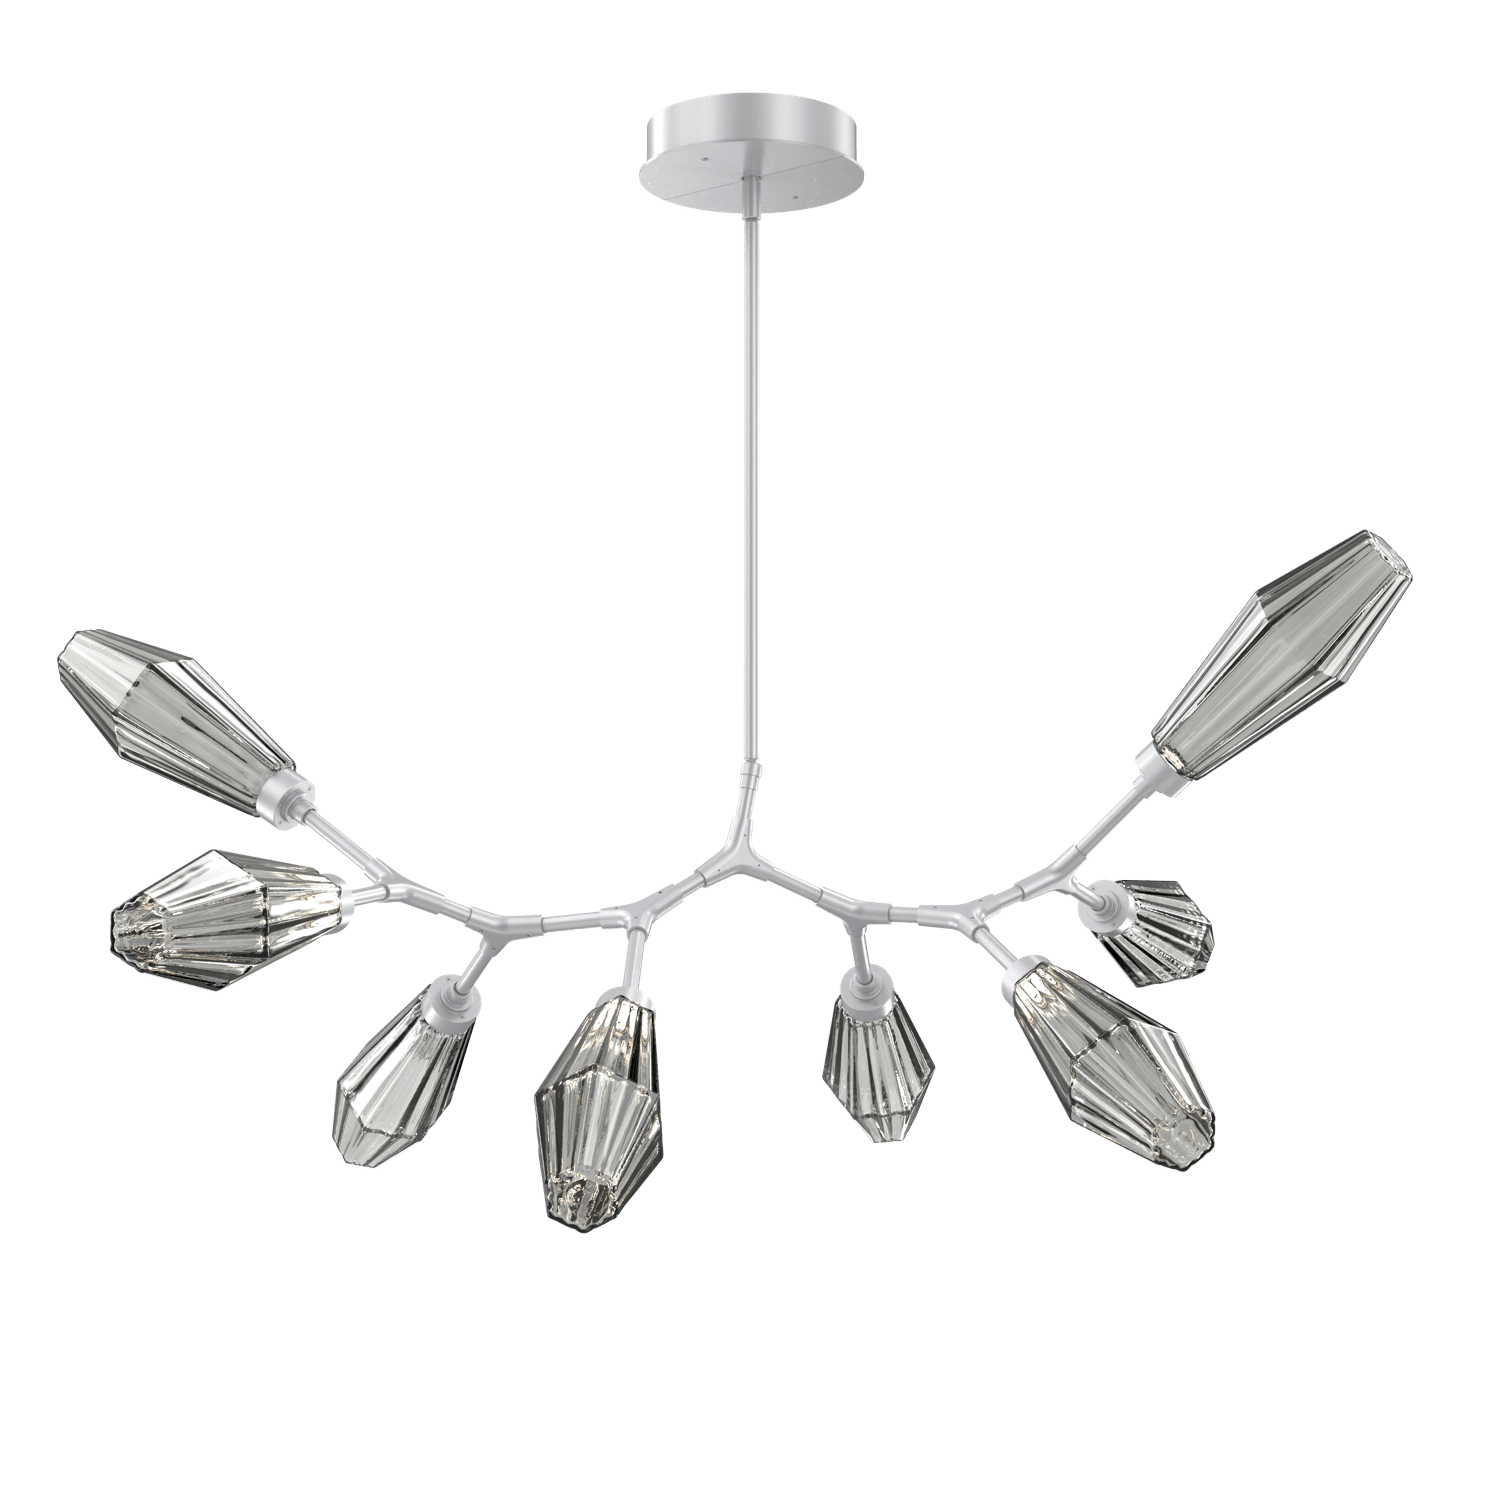 PLB0049-BB-CS-RS-Hammerton-Studio-Aalto-8-light-modern-branch-chandelier-with-classic-silver-finish-and-optic-ribbed-smoke-glass-shades-and-LED-lamping